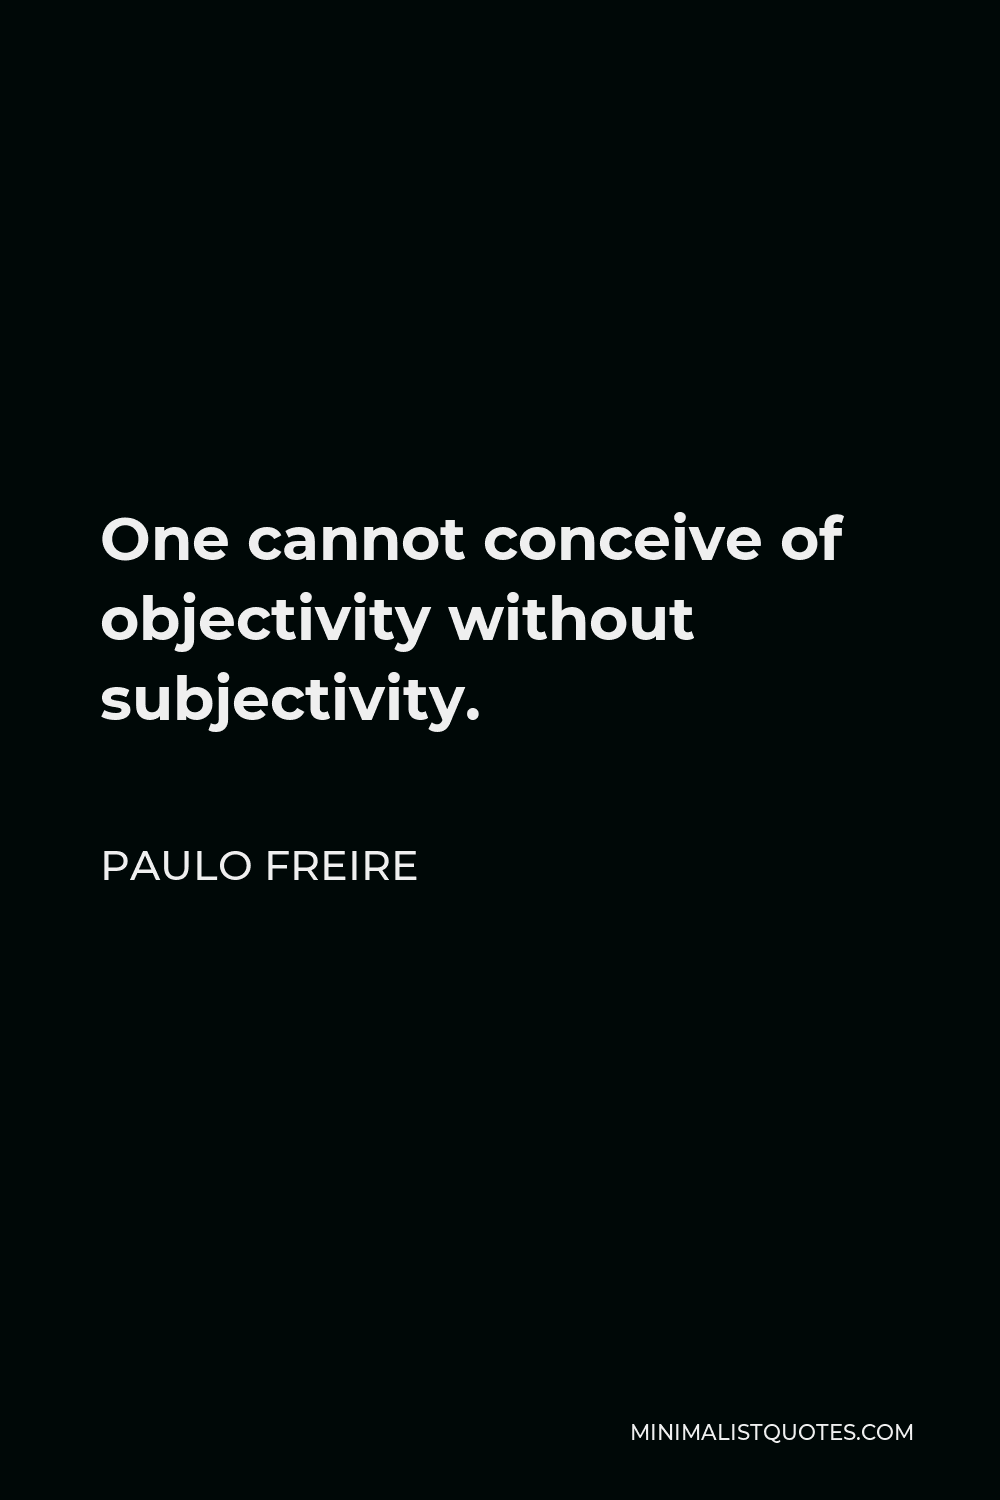 Paulo Freire Quote - One cannot conceive of objectivity without subjectivity.